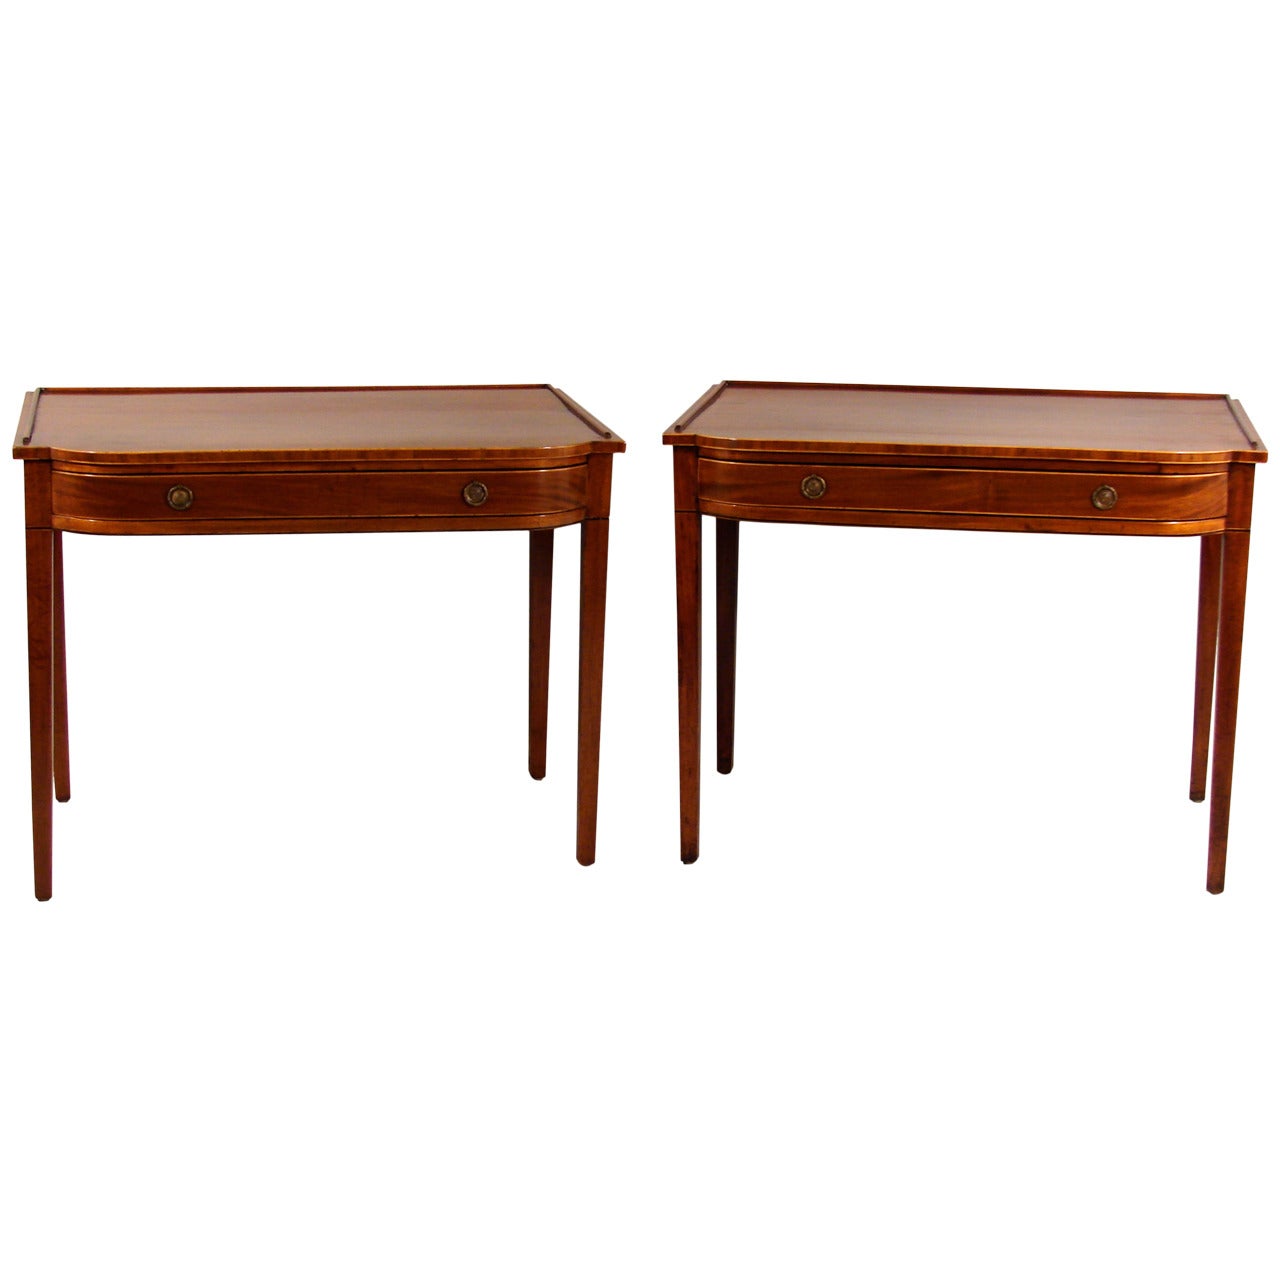 Pair of George III Mahogany Inlaid Console Tables